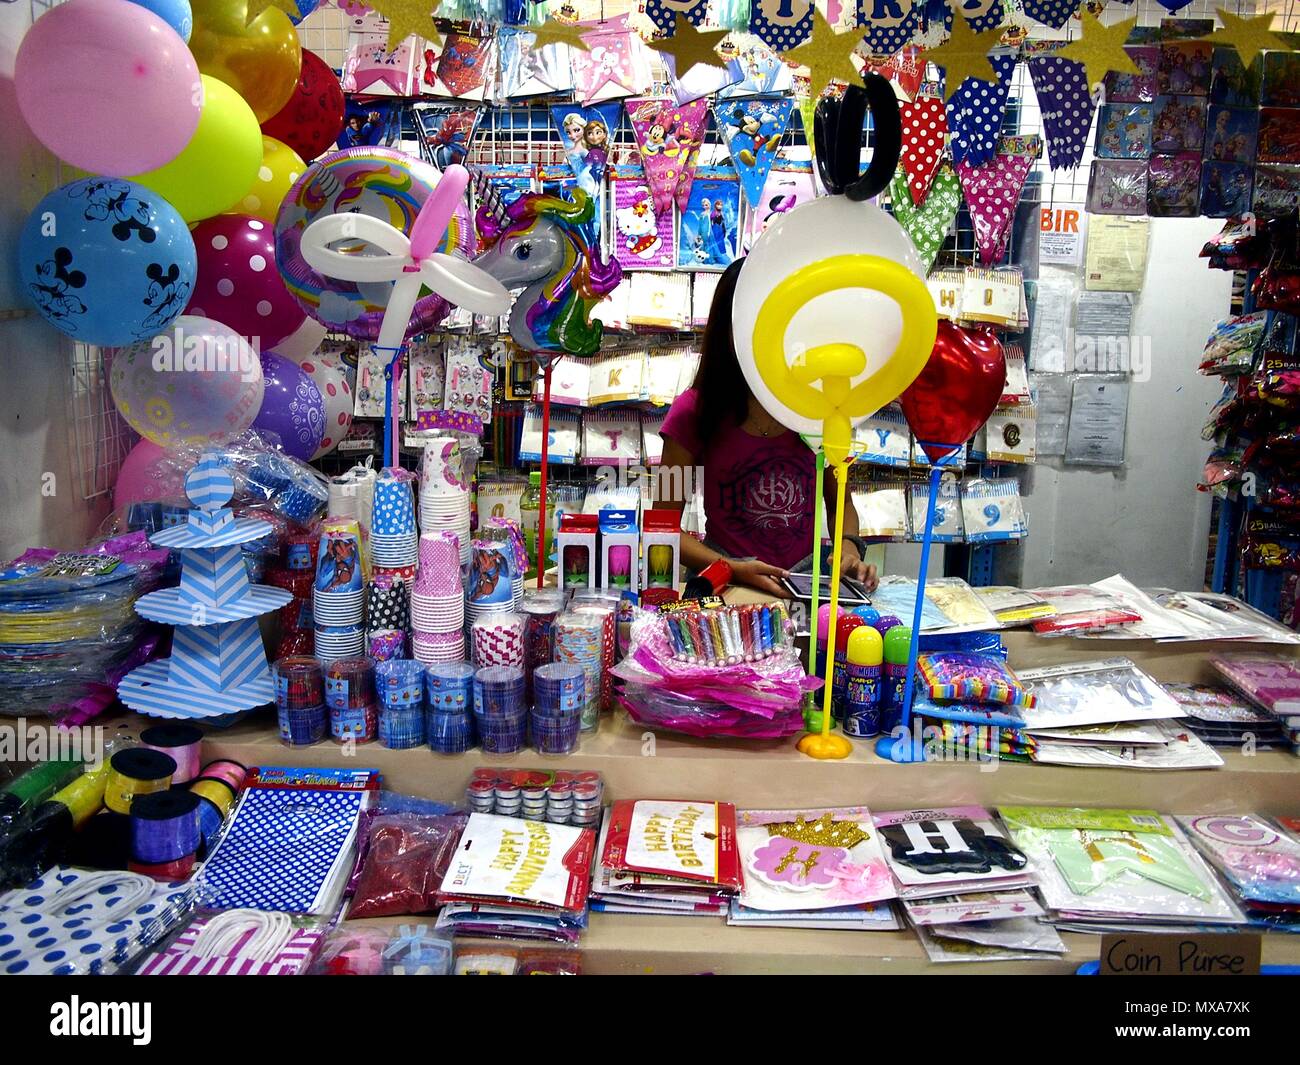 DIVISORIA, MANILA CITY, PHILIPPINES - MAY 14, 2018: Assorted school supplies on display at a bazaar stall inside a big shopping mall. Stock Photo